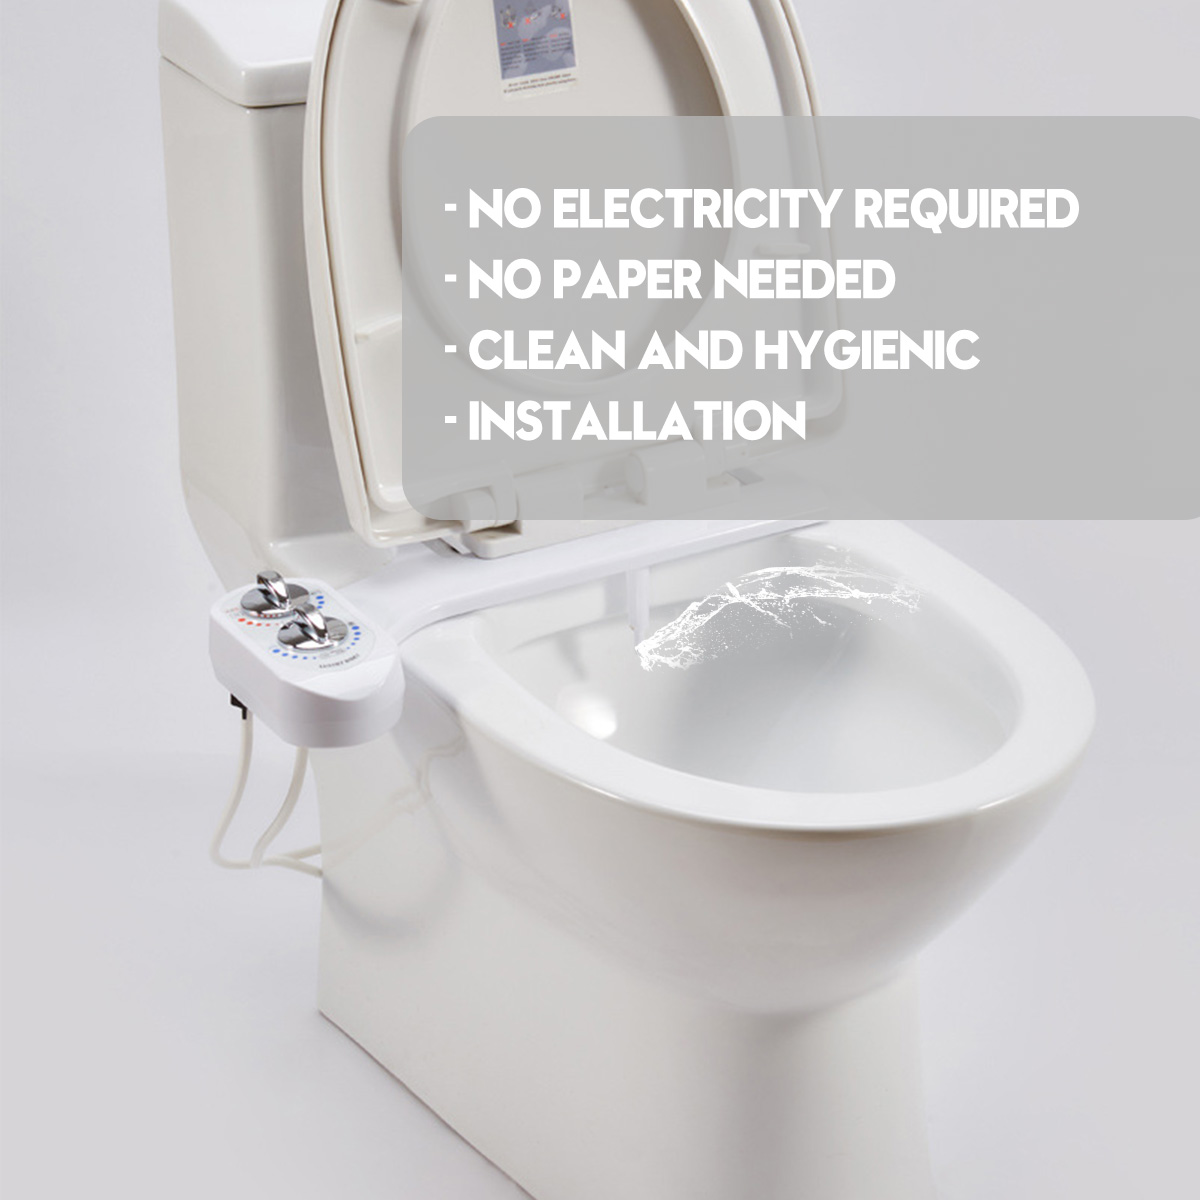 Details about   15/16" Toilet Seat Bidet Attachment Bathroom Water Spray Wash Non-Electric Tool 